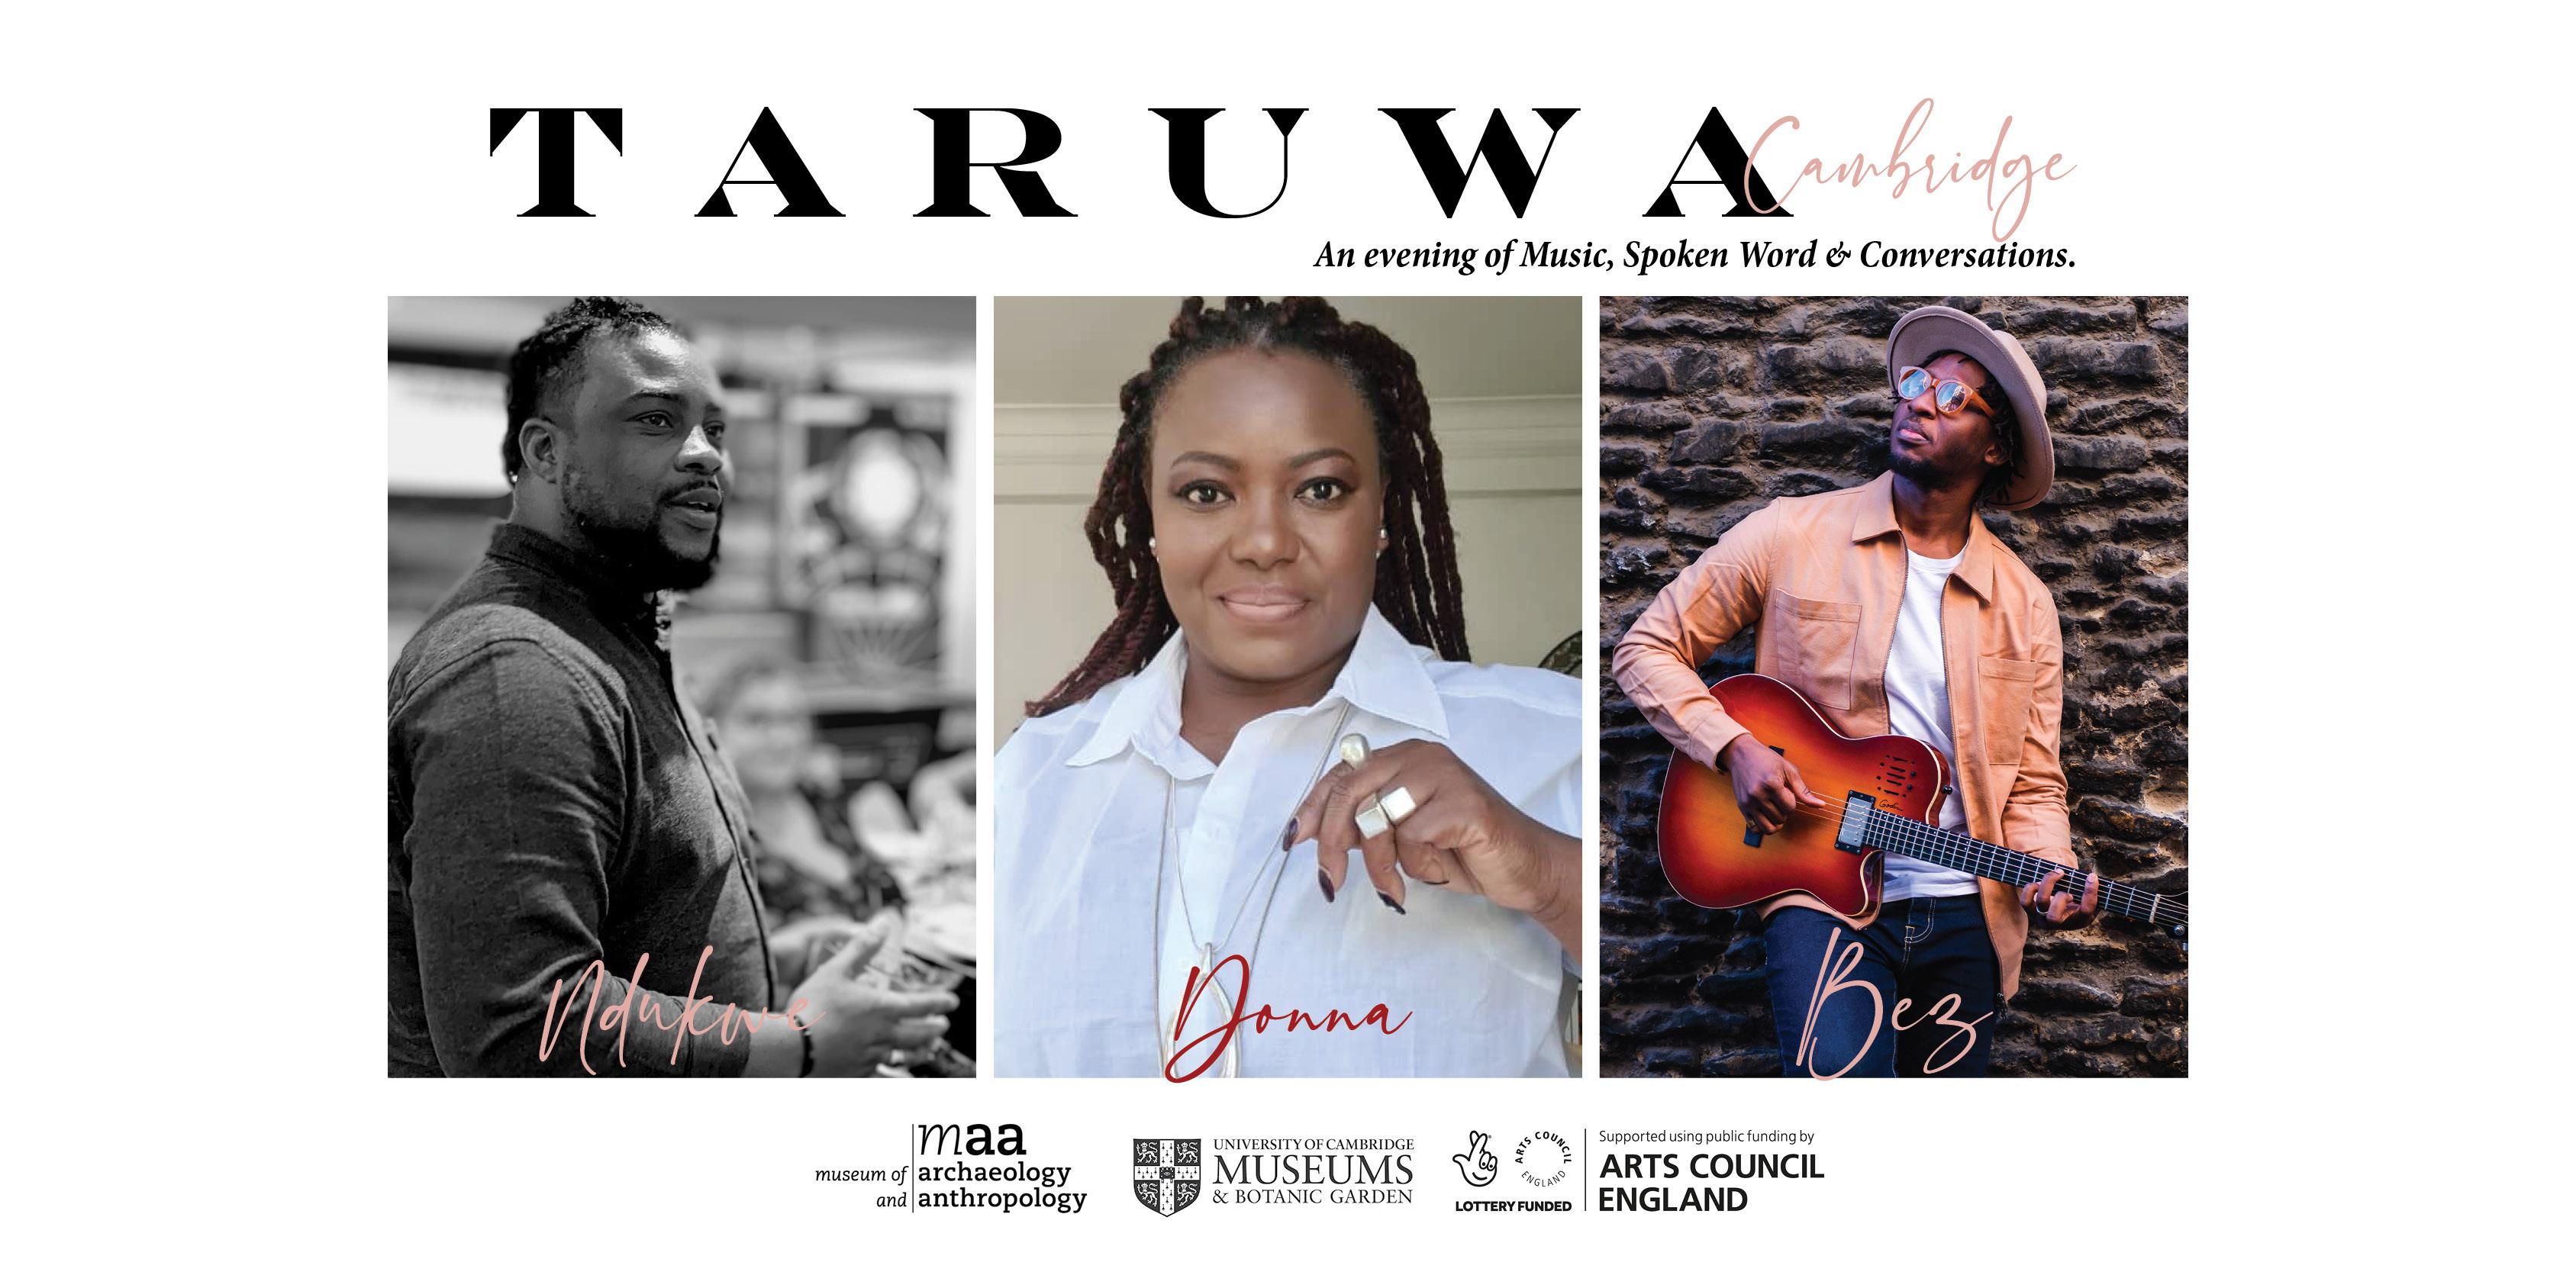 Images of the three contributors to the Taruwa event. Below are the logos of the Museum of Archaeology and Anthropology, University of Cambridge Museums and the Arts Council. At the top of the image is the event title and description.